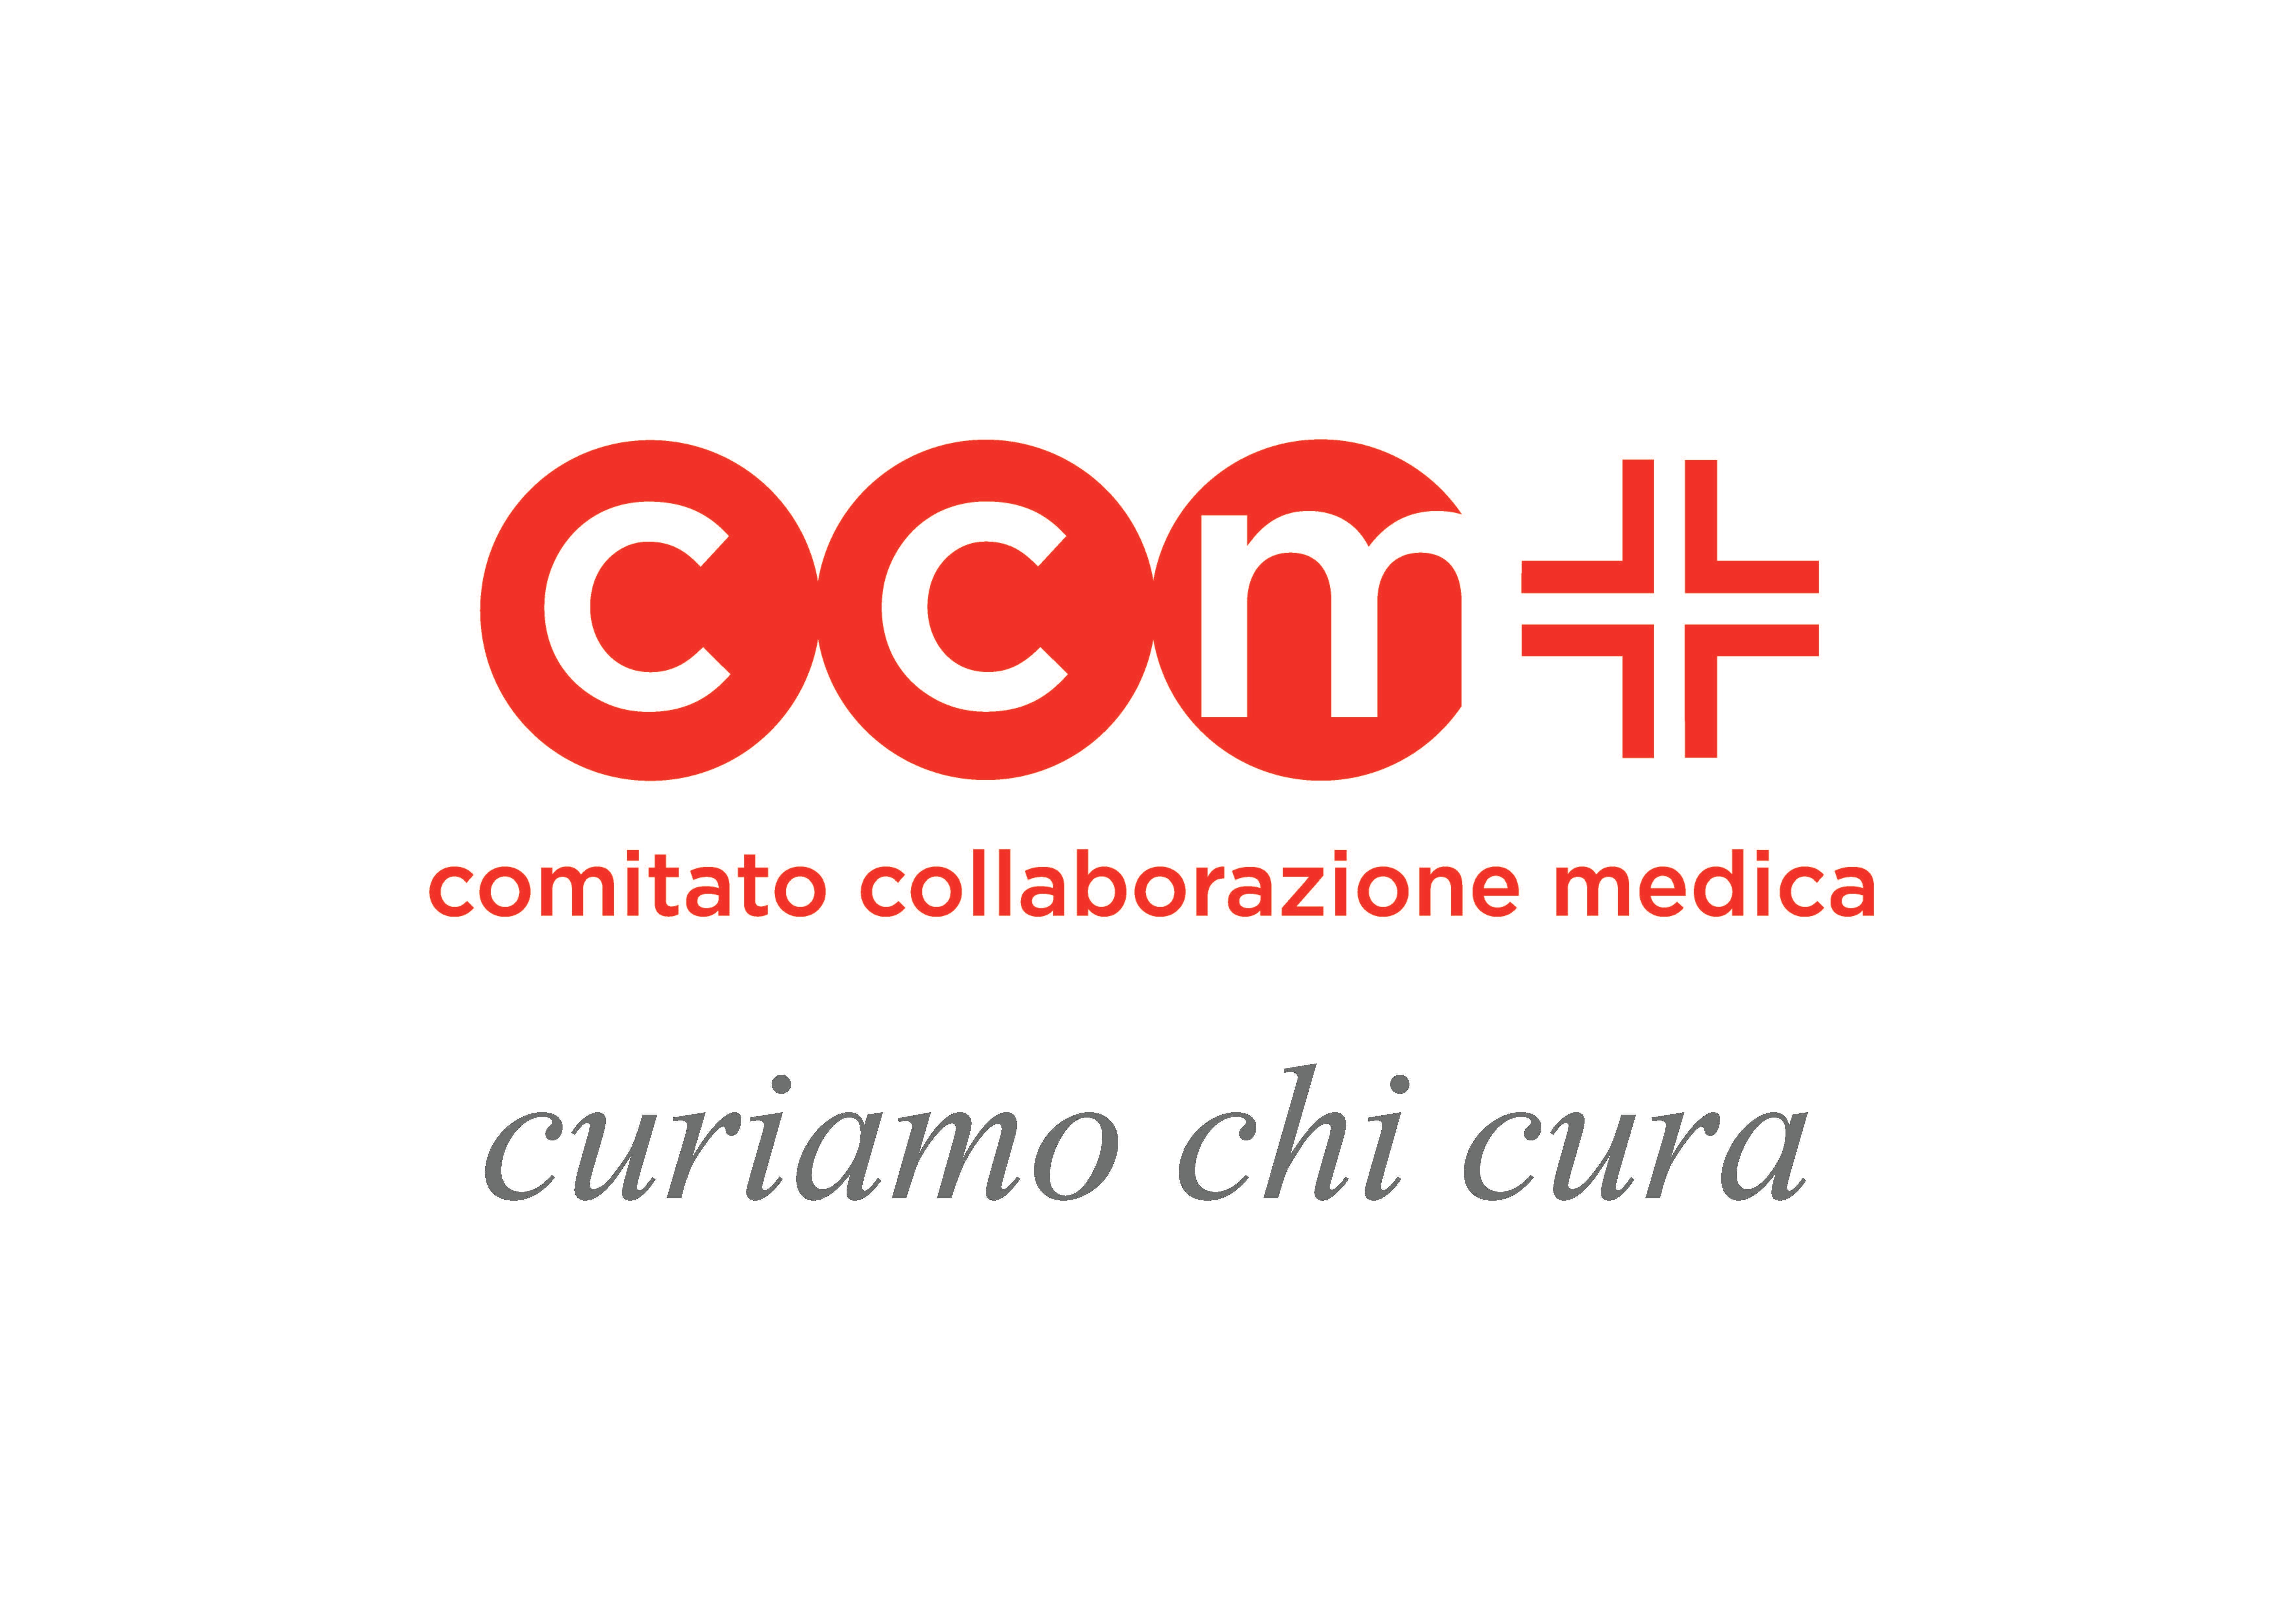 CCM Logo - File:01-CCM Logo Rosso IT PayOff.jpg - Wikimedia Commons